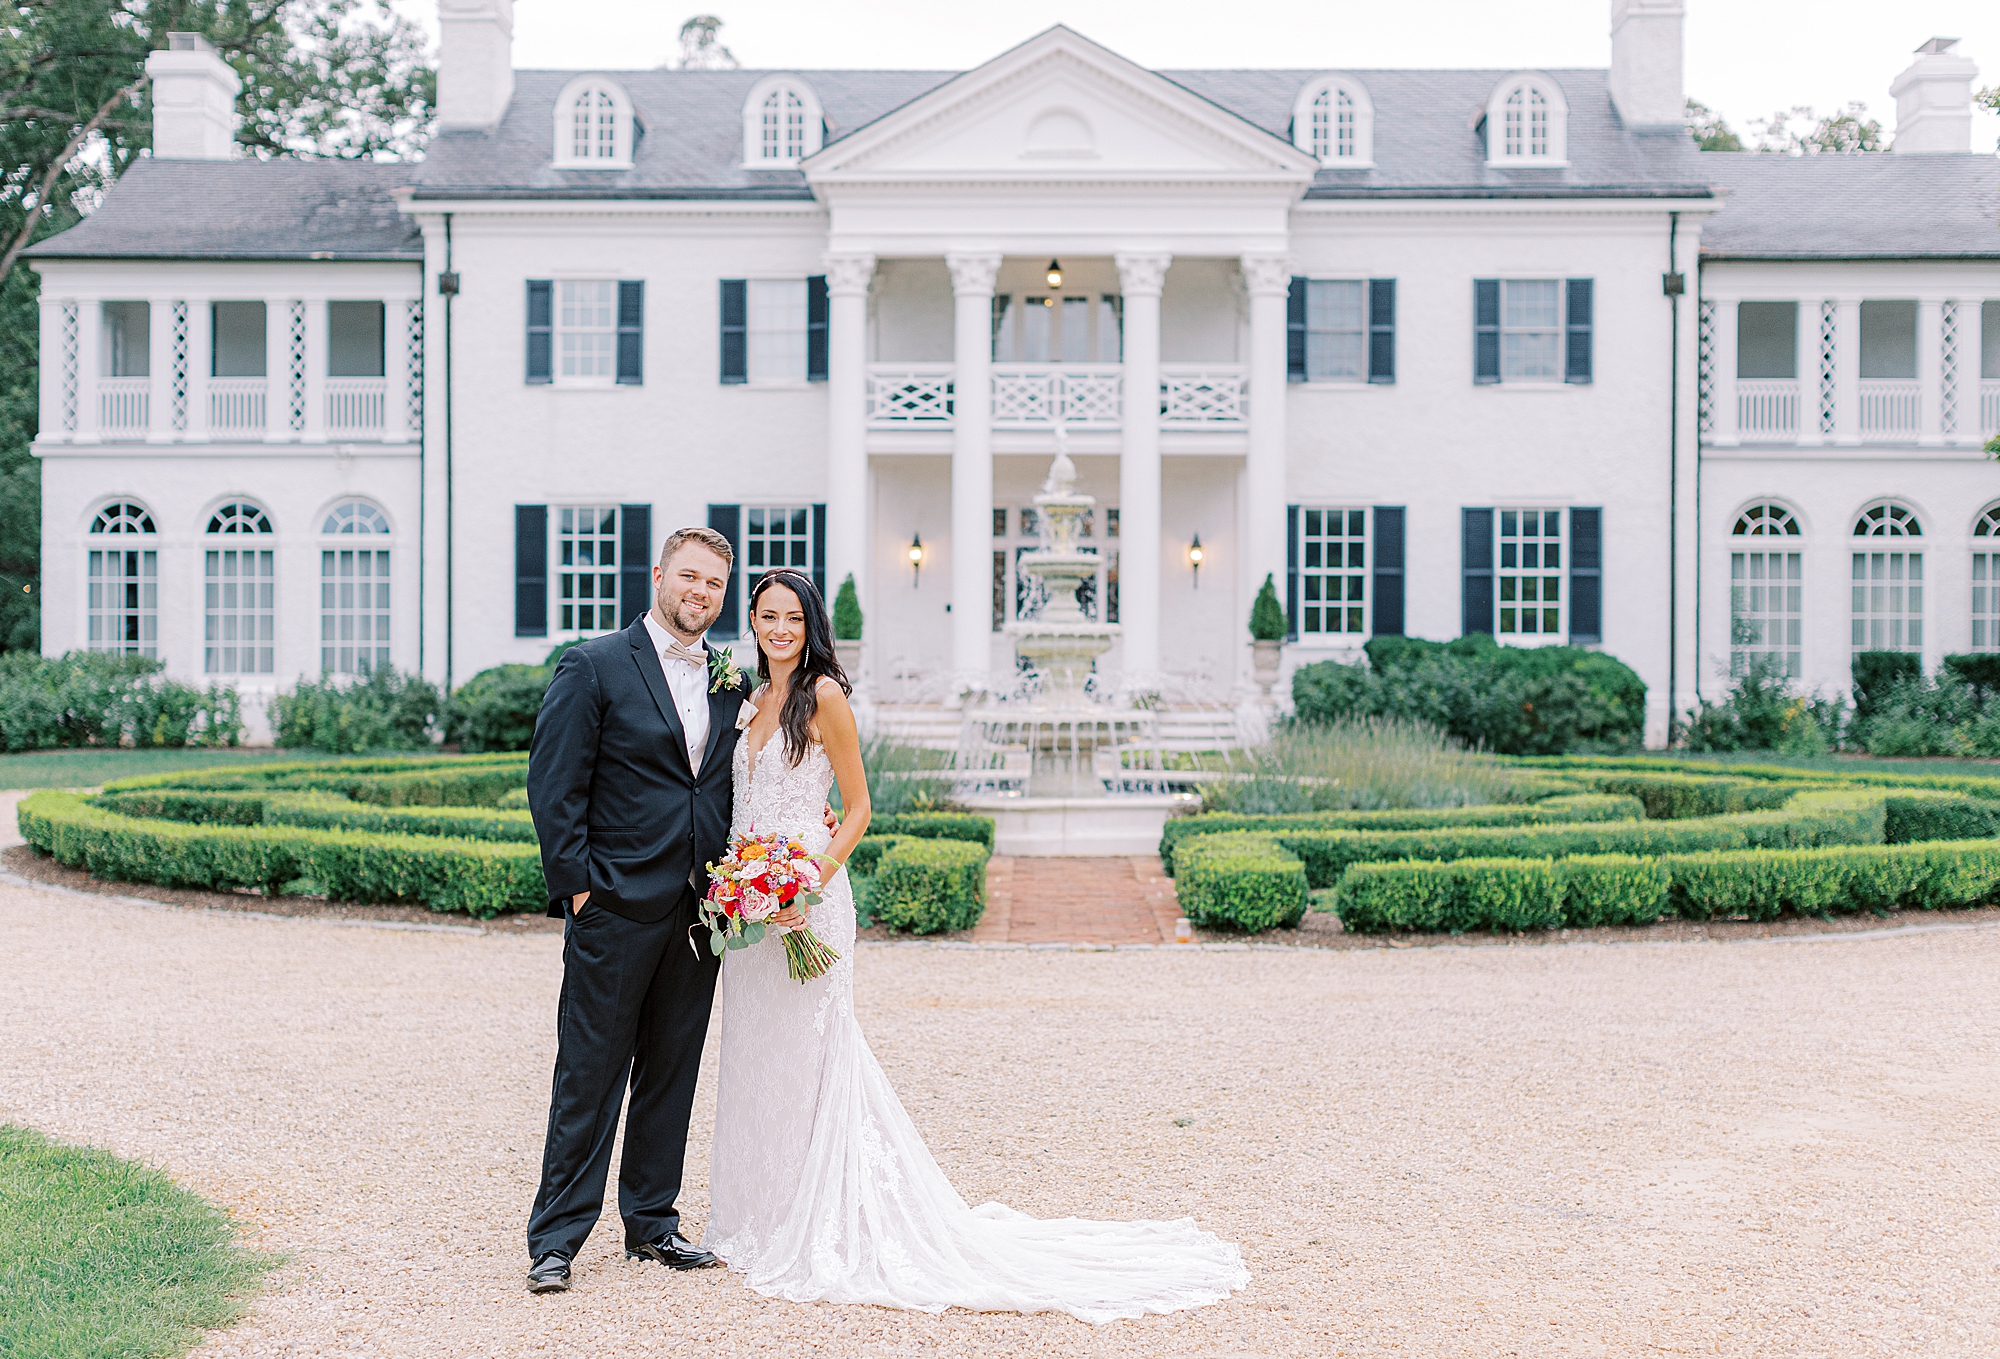 Traditional smiling portraits of bride and groom at wedding venue in Charlottesville.